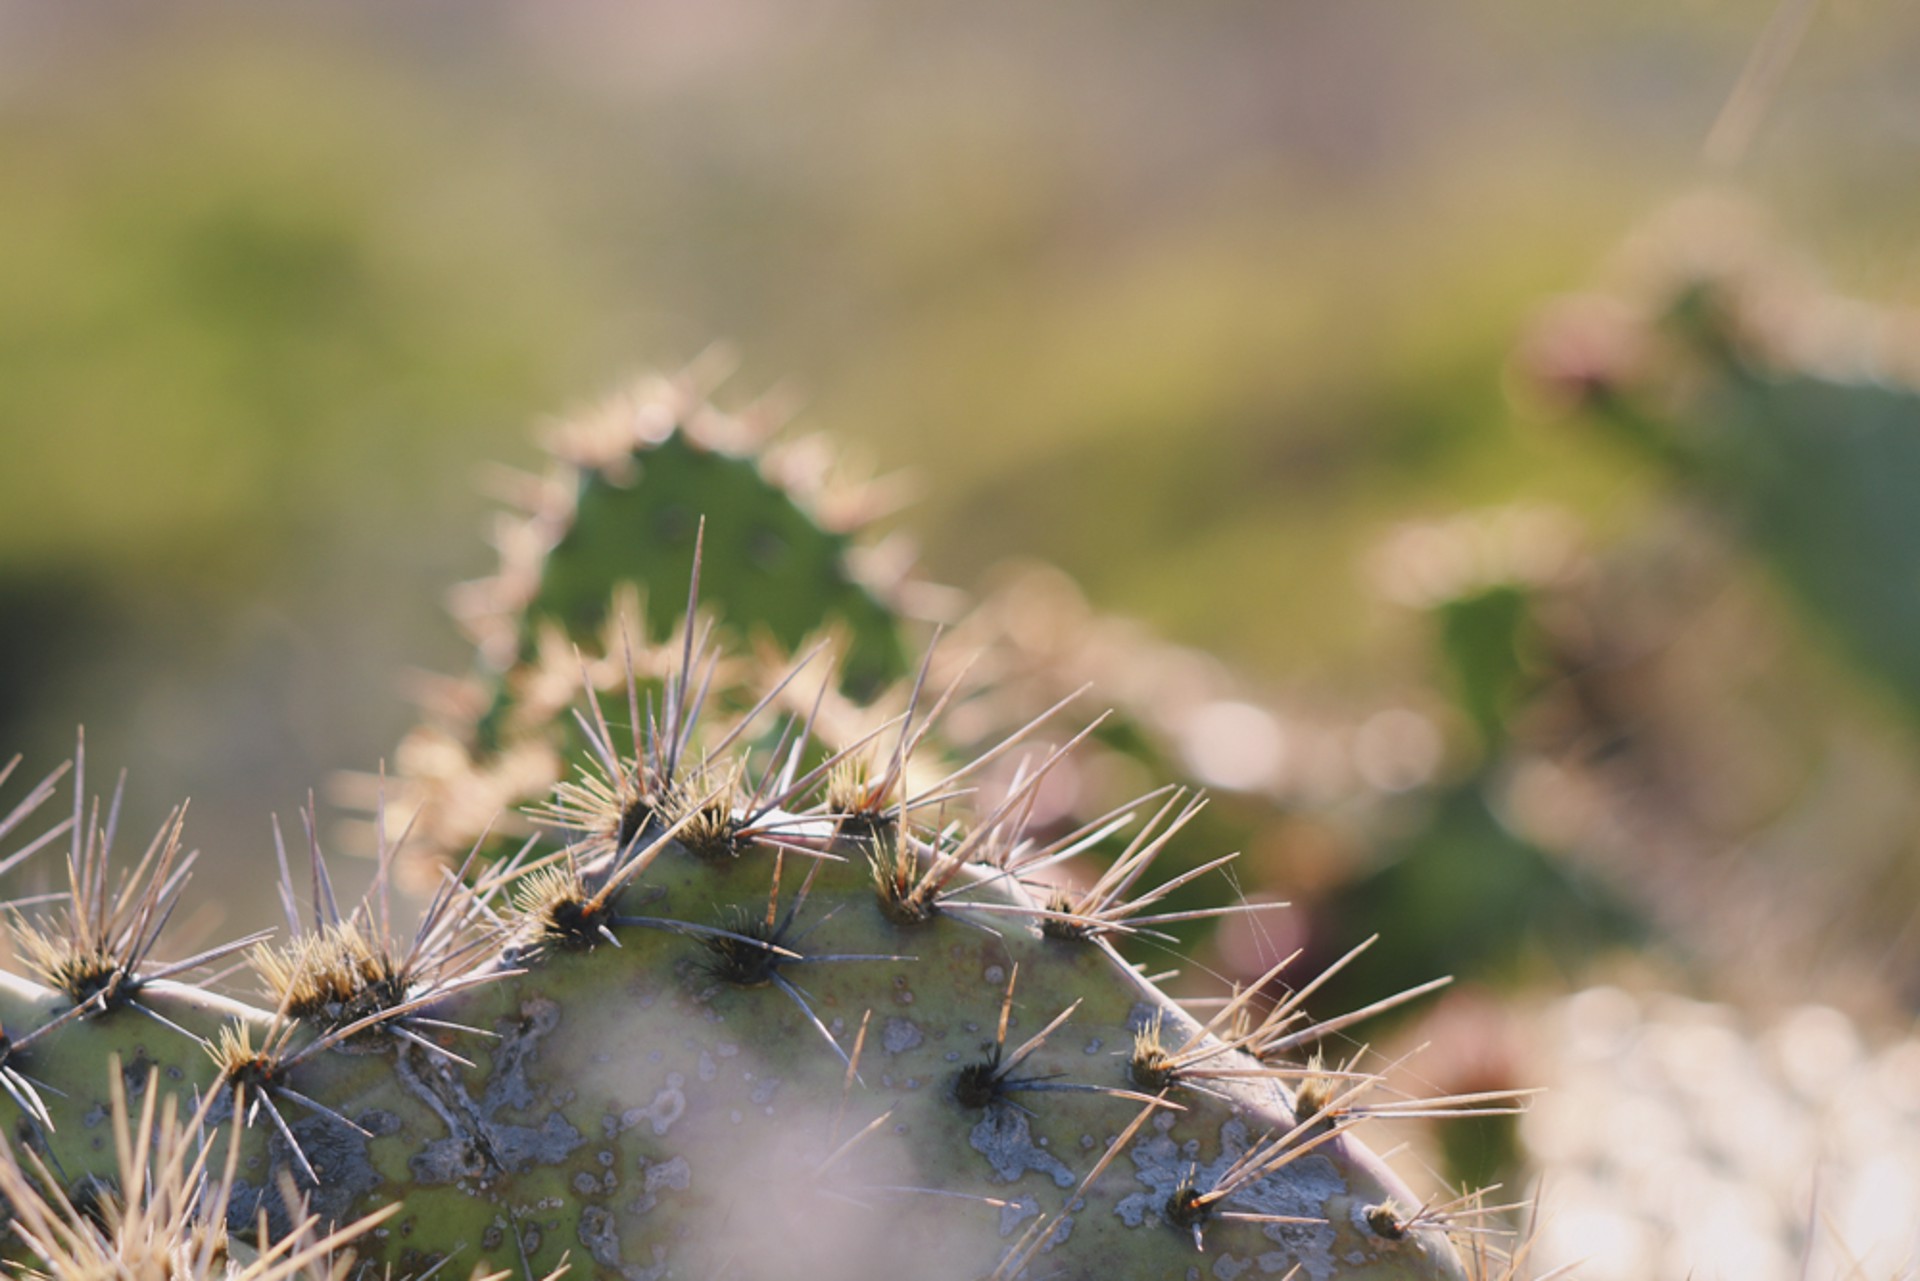 Cactus Needles by Melina Velleman